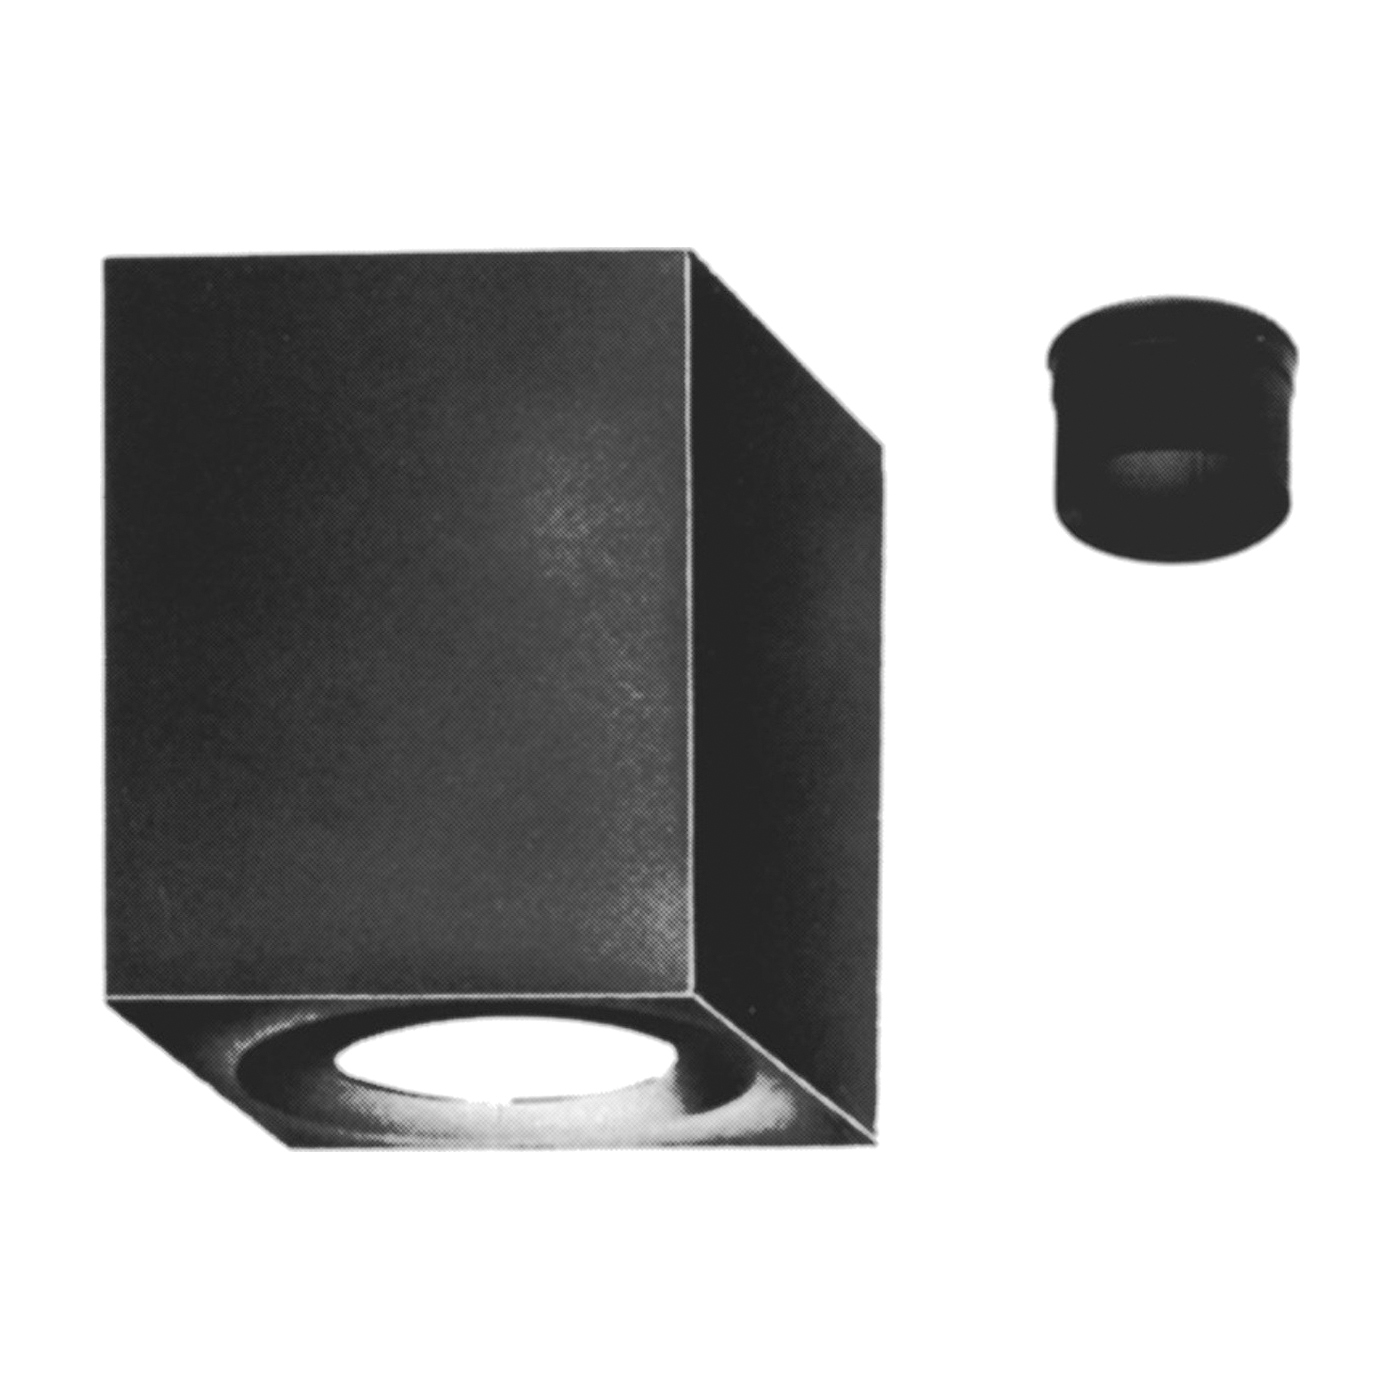 8HS-RSA12 Roof Support Box, Black